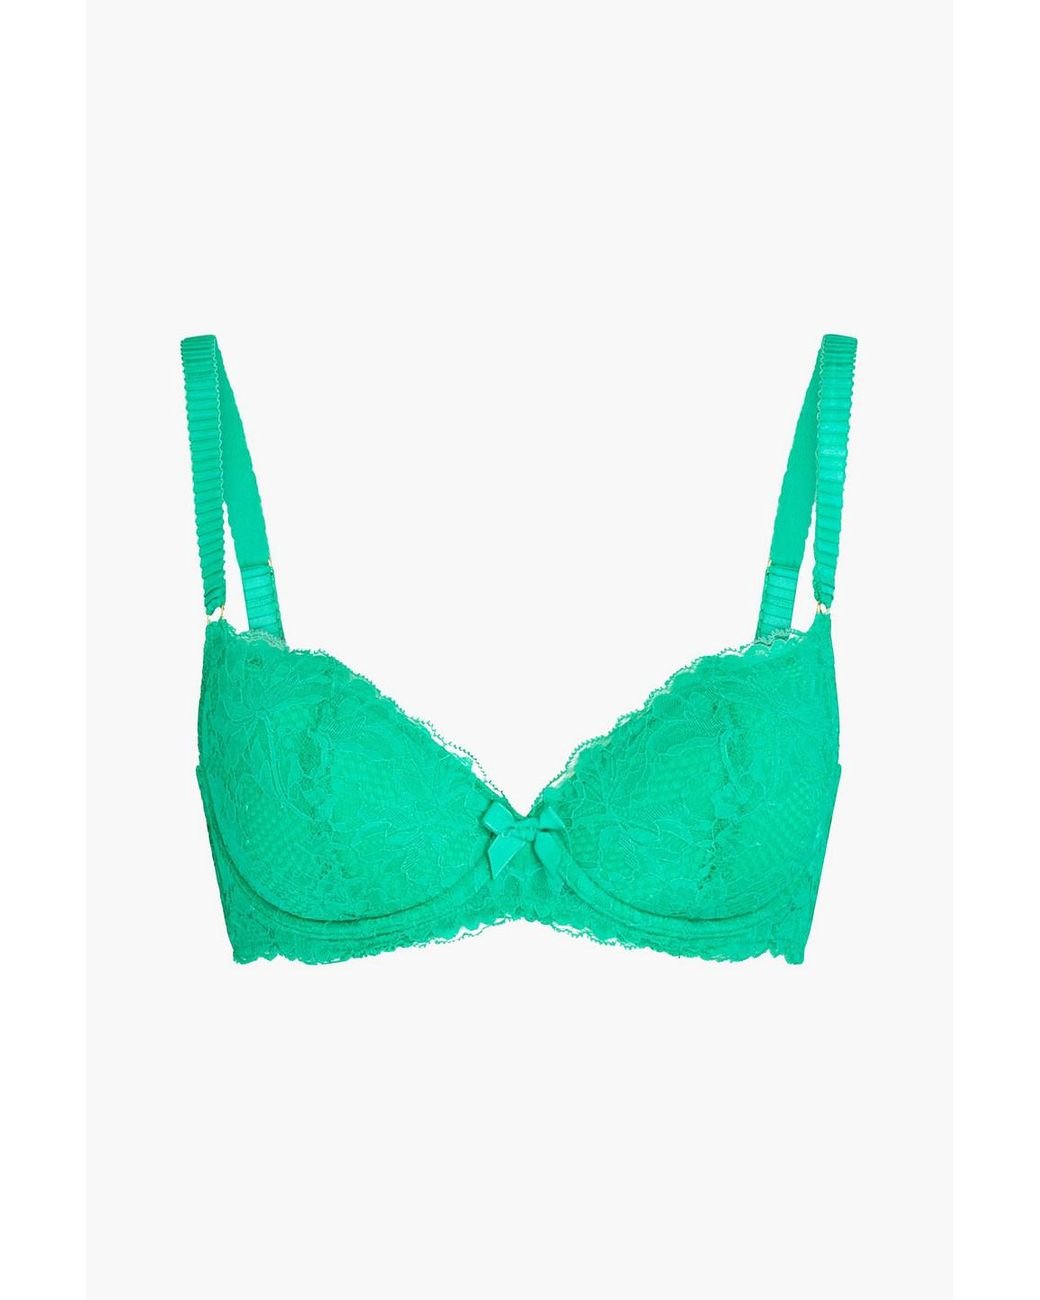 https://cdna.lystit.com/1040/1300/n/photos/theoutnet/d0702965/agent-provocateur-Green-Rosele-Bow-embellished-Corded-Lace-Push-up-Bra.jpeg